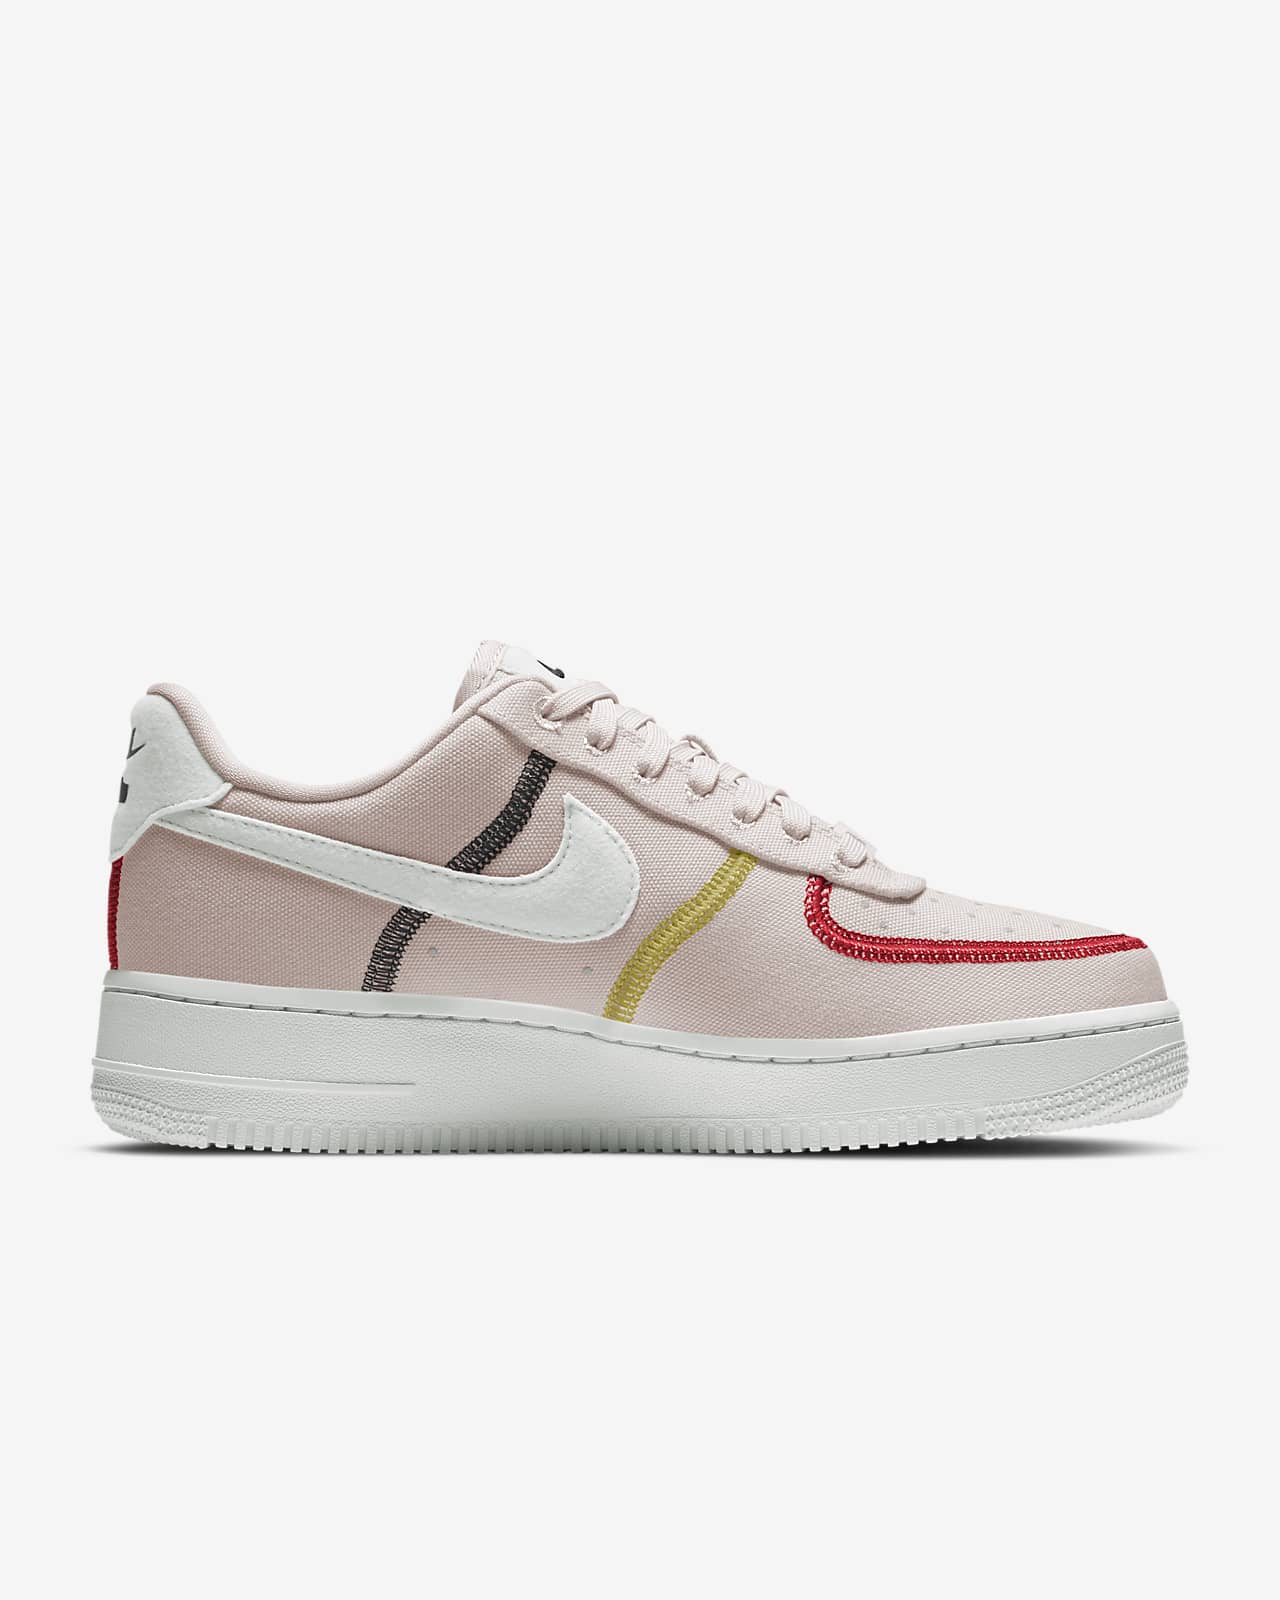 nike air force 1 07 on sale